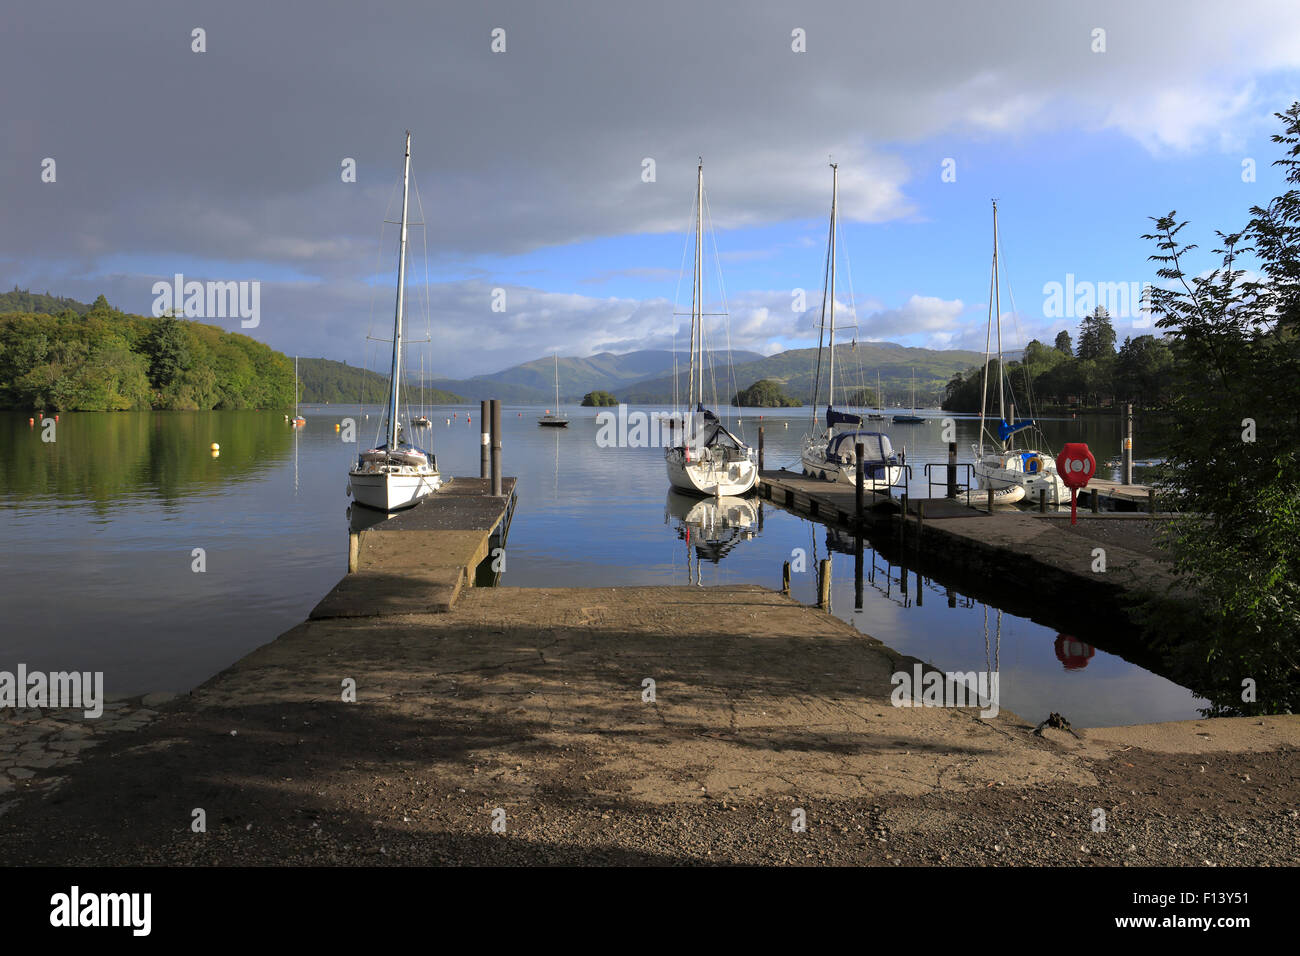 Yachts berthed on Lake Windermere, Bowness on Windermere, Cumbria, Lake District National Park, England, UK. Stock Photo